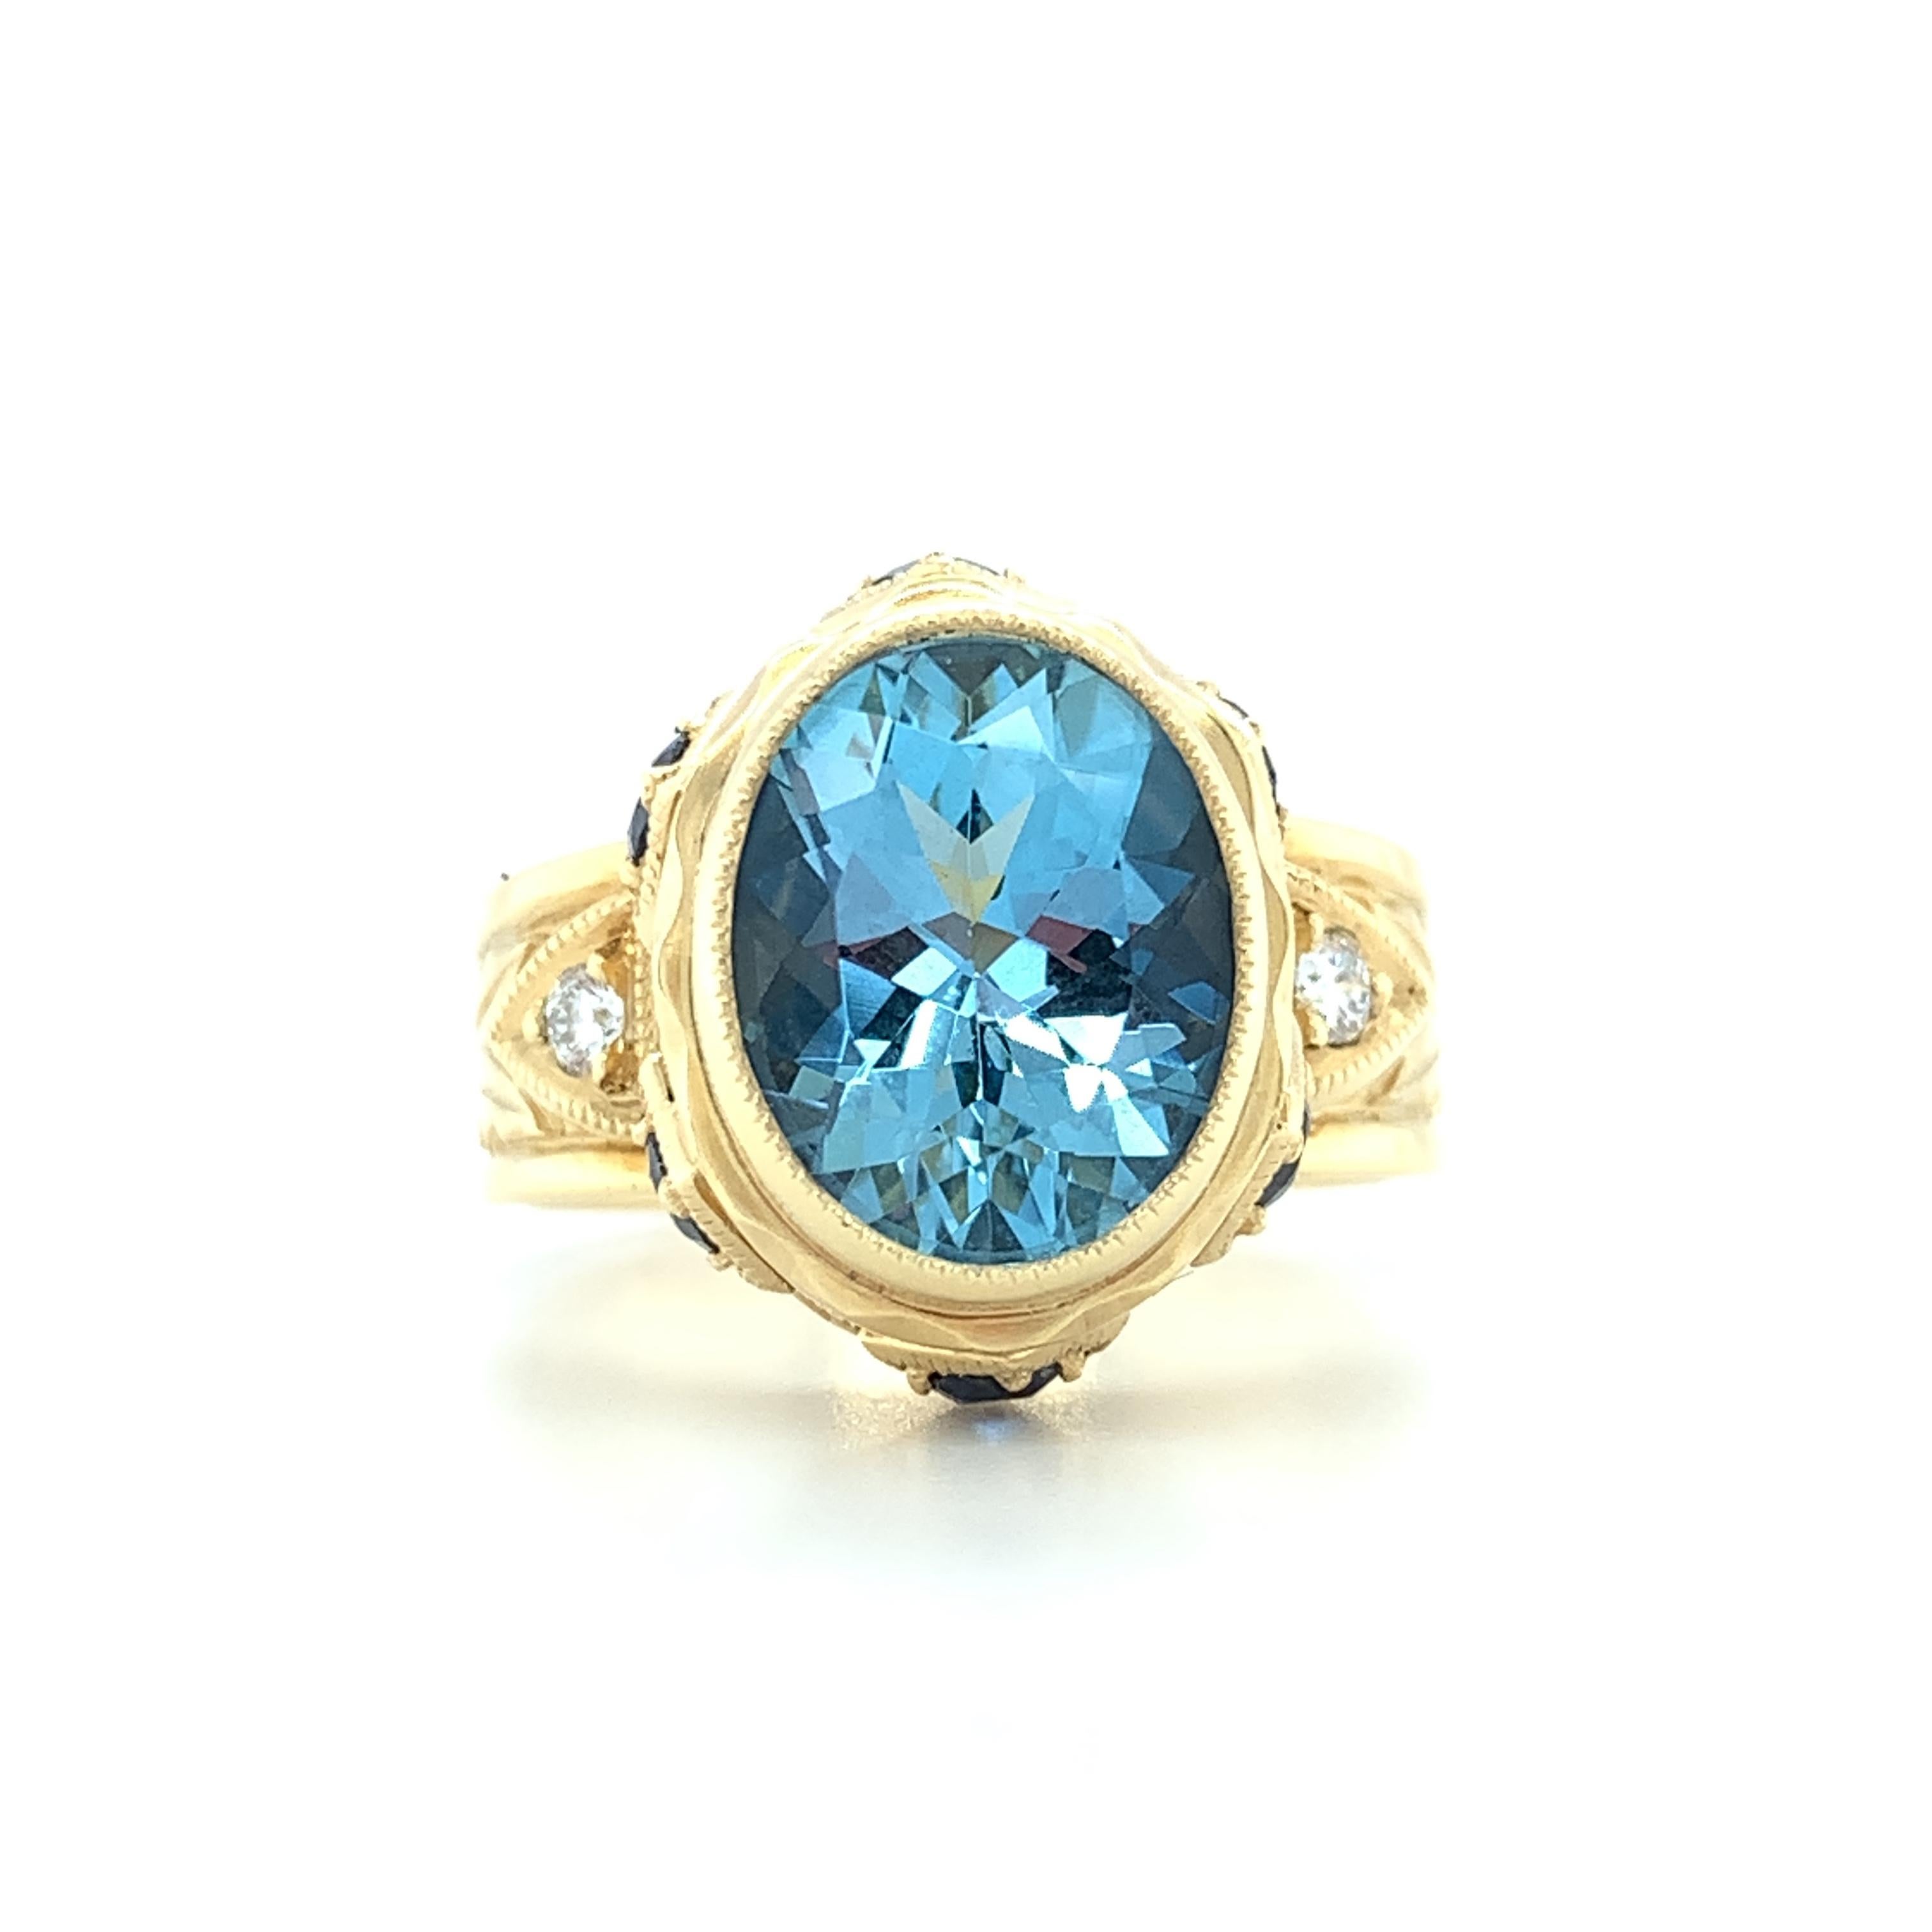 The gorgeous, crystalline aquamarine featured in this handmade 18k yellow gold ring is beautifully faceted and has strikingly rich color! The center gemstone is set in a high bezel that has been accented with royal blue sapphires and engraved by